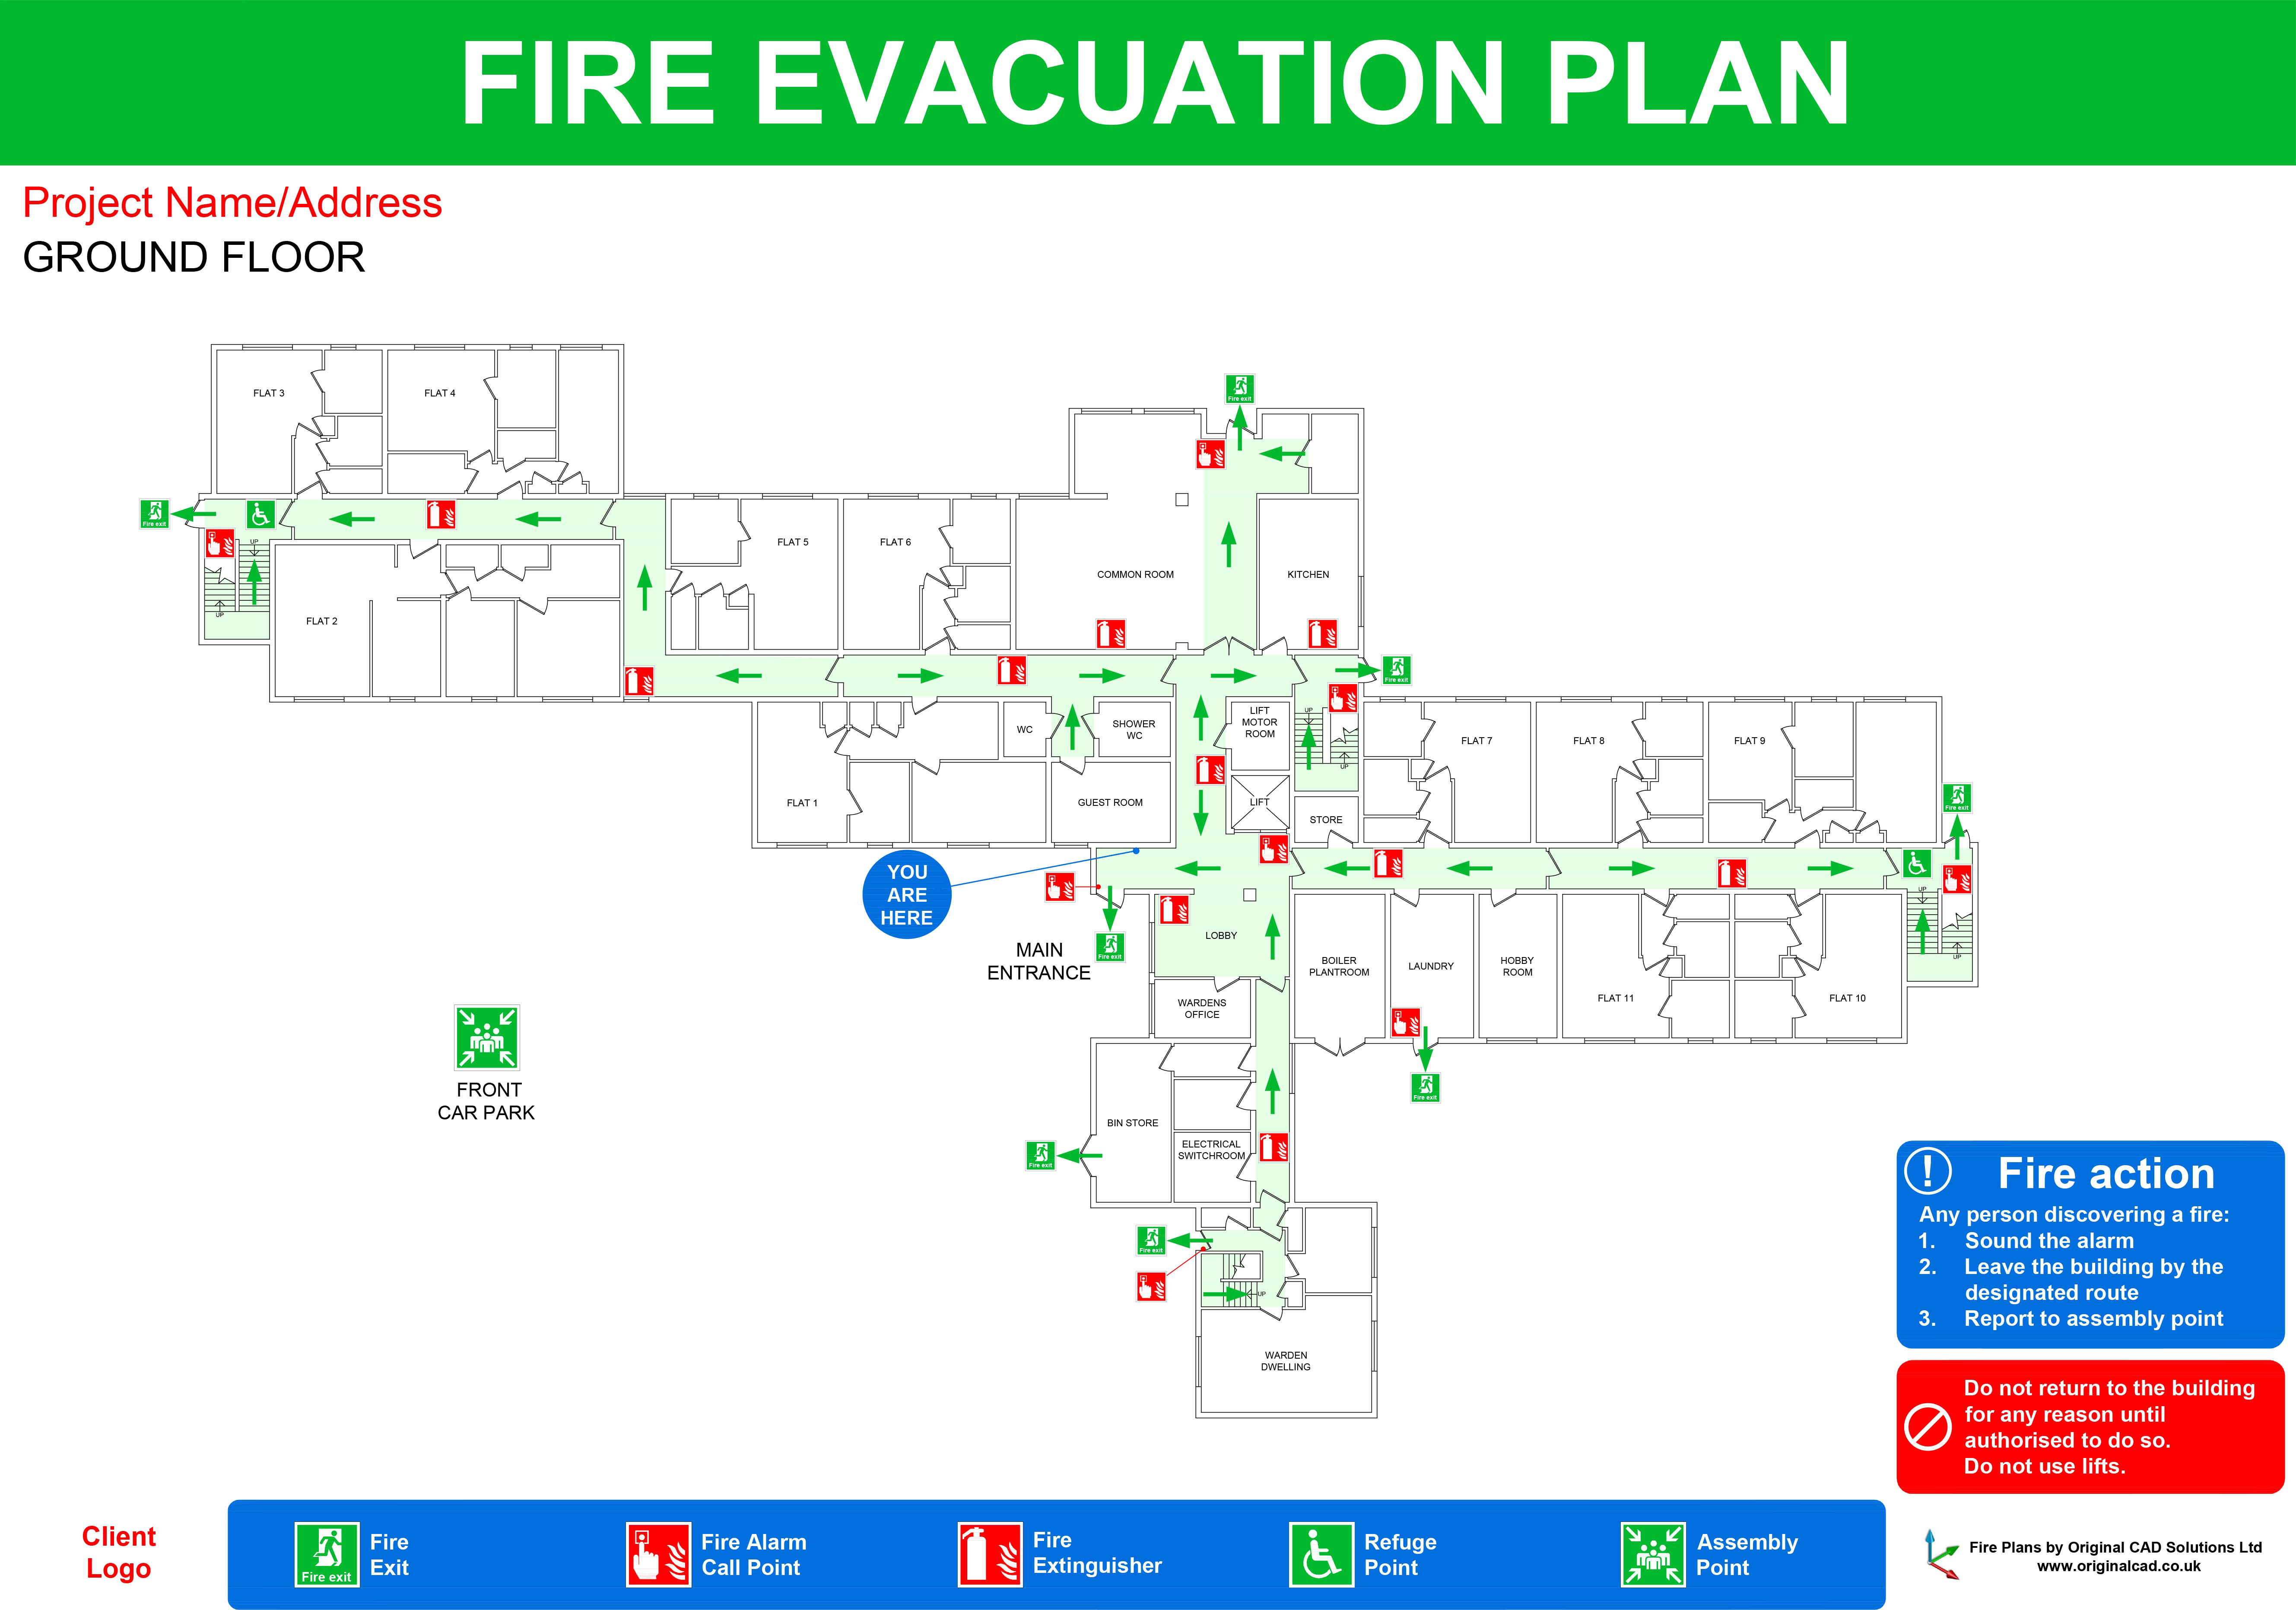 how-to-prepare-an-emergency-evacuation-plan-fireco